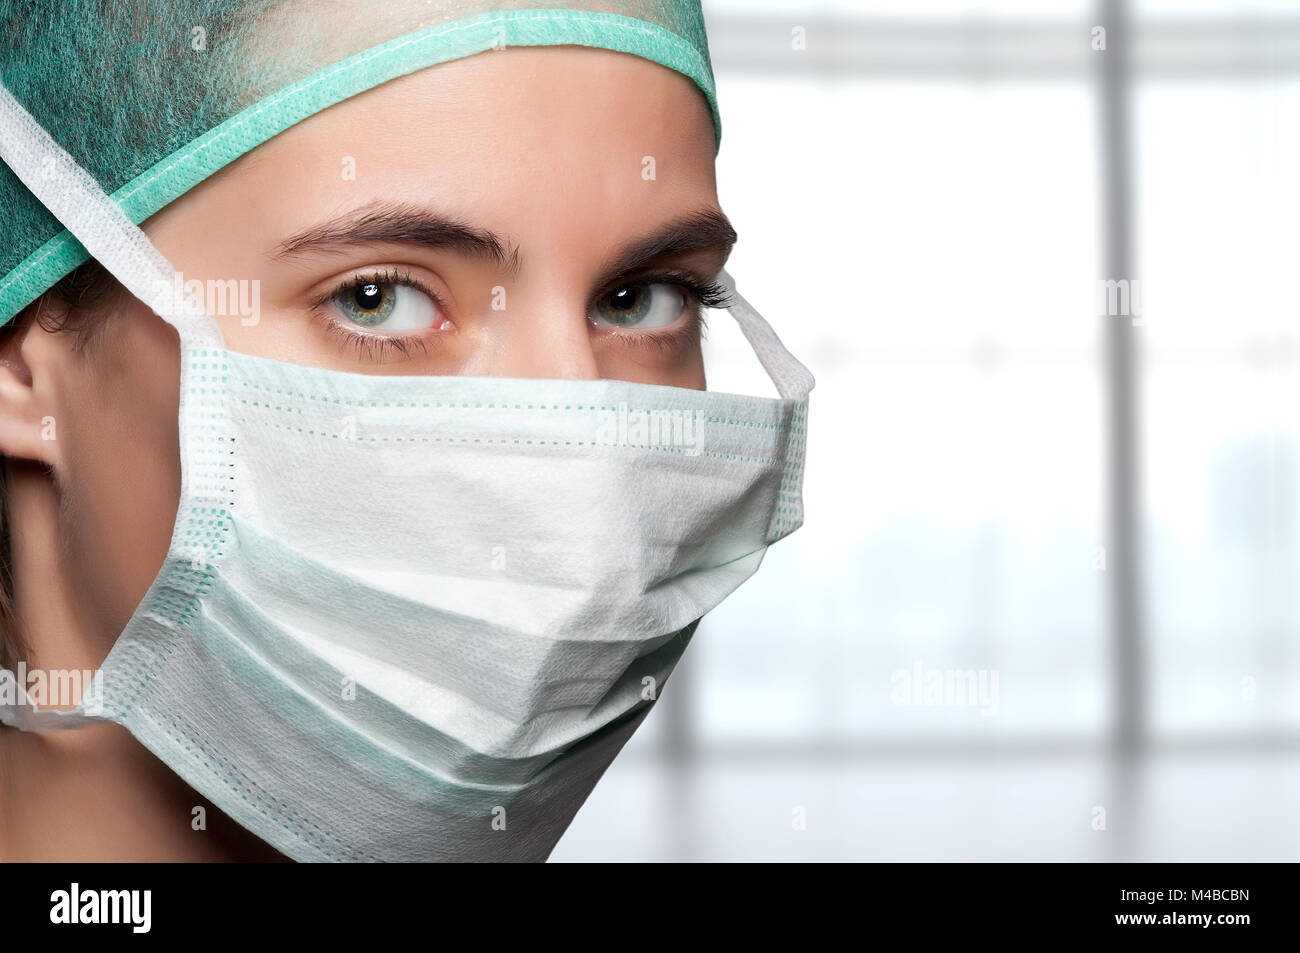 Female Surgeon with face mask Stock Photo